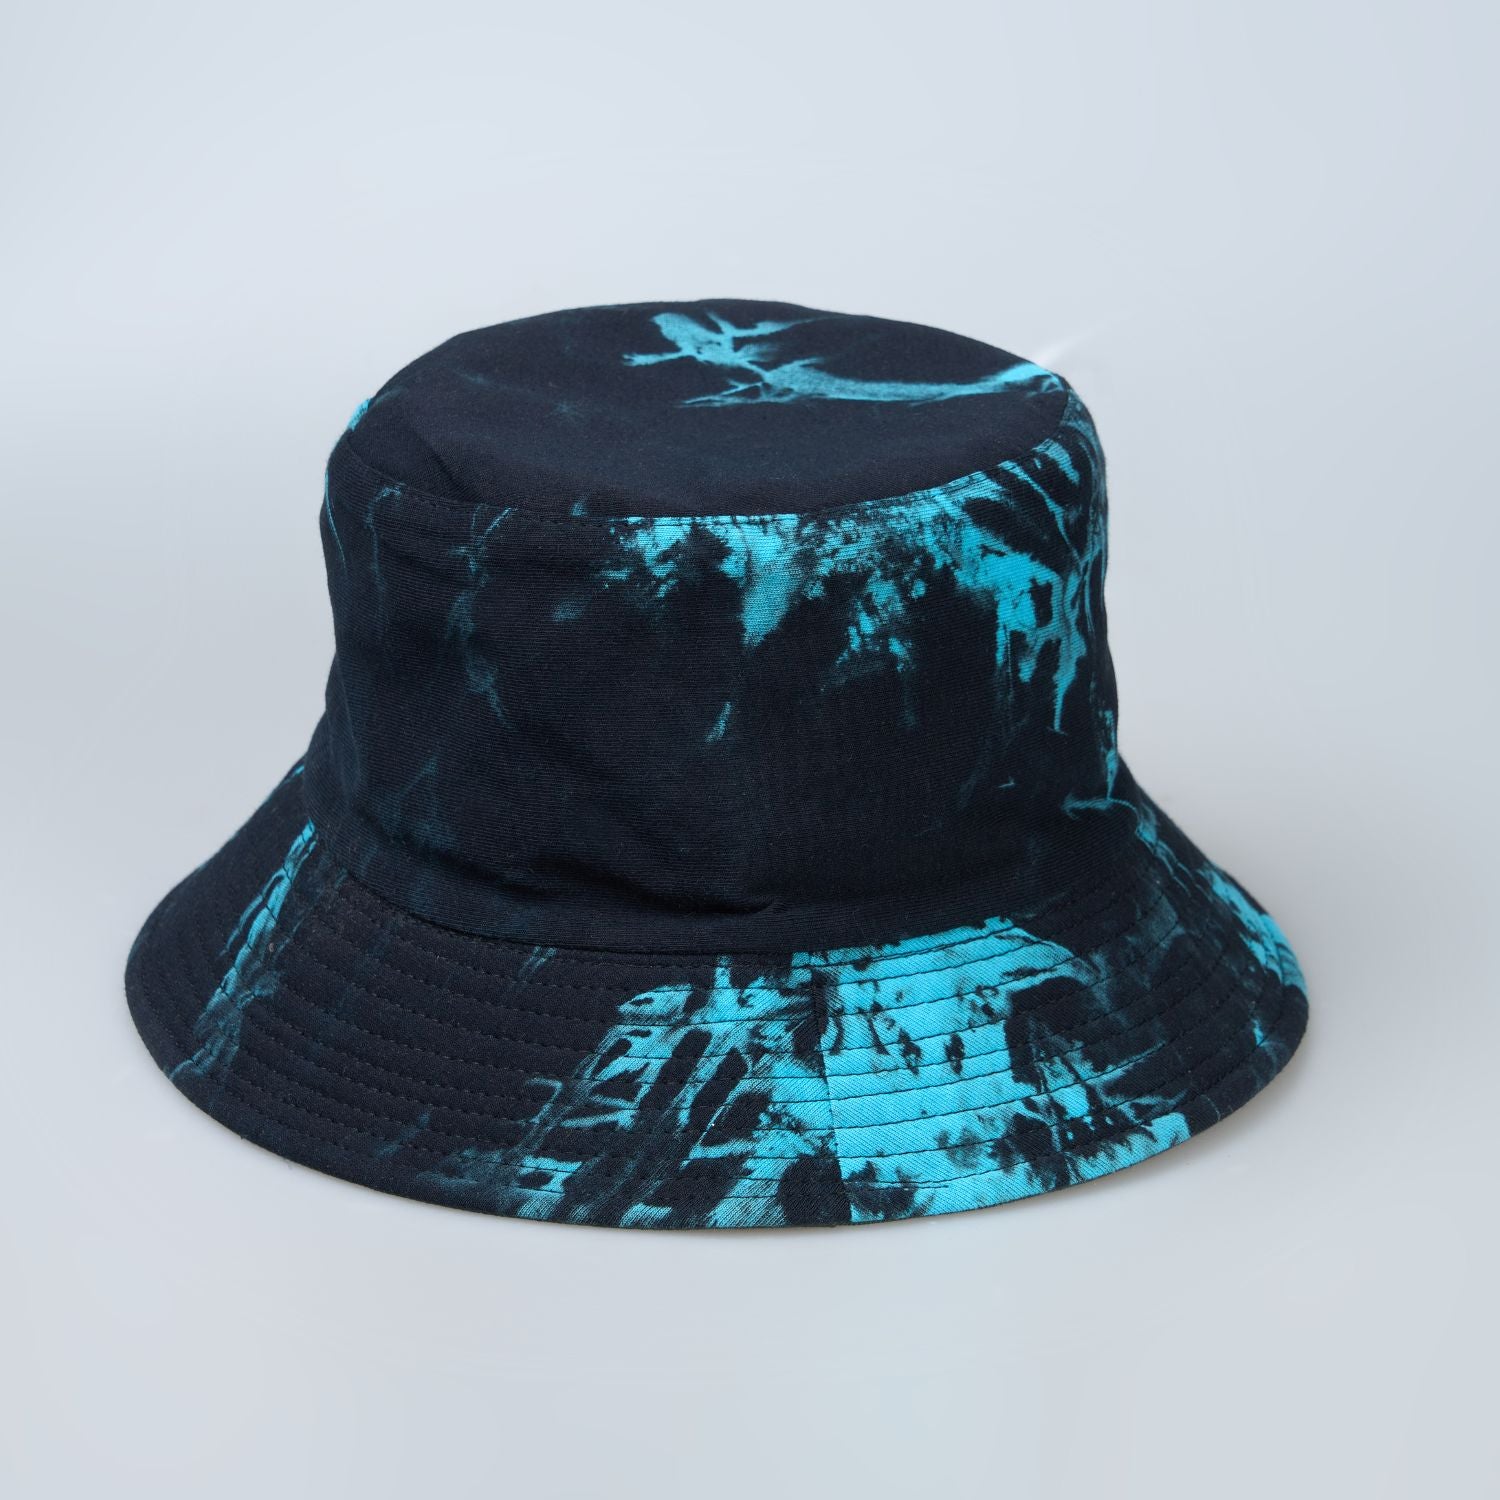 Blue and green colored, lightweight bucket hat for men, front view.